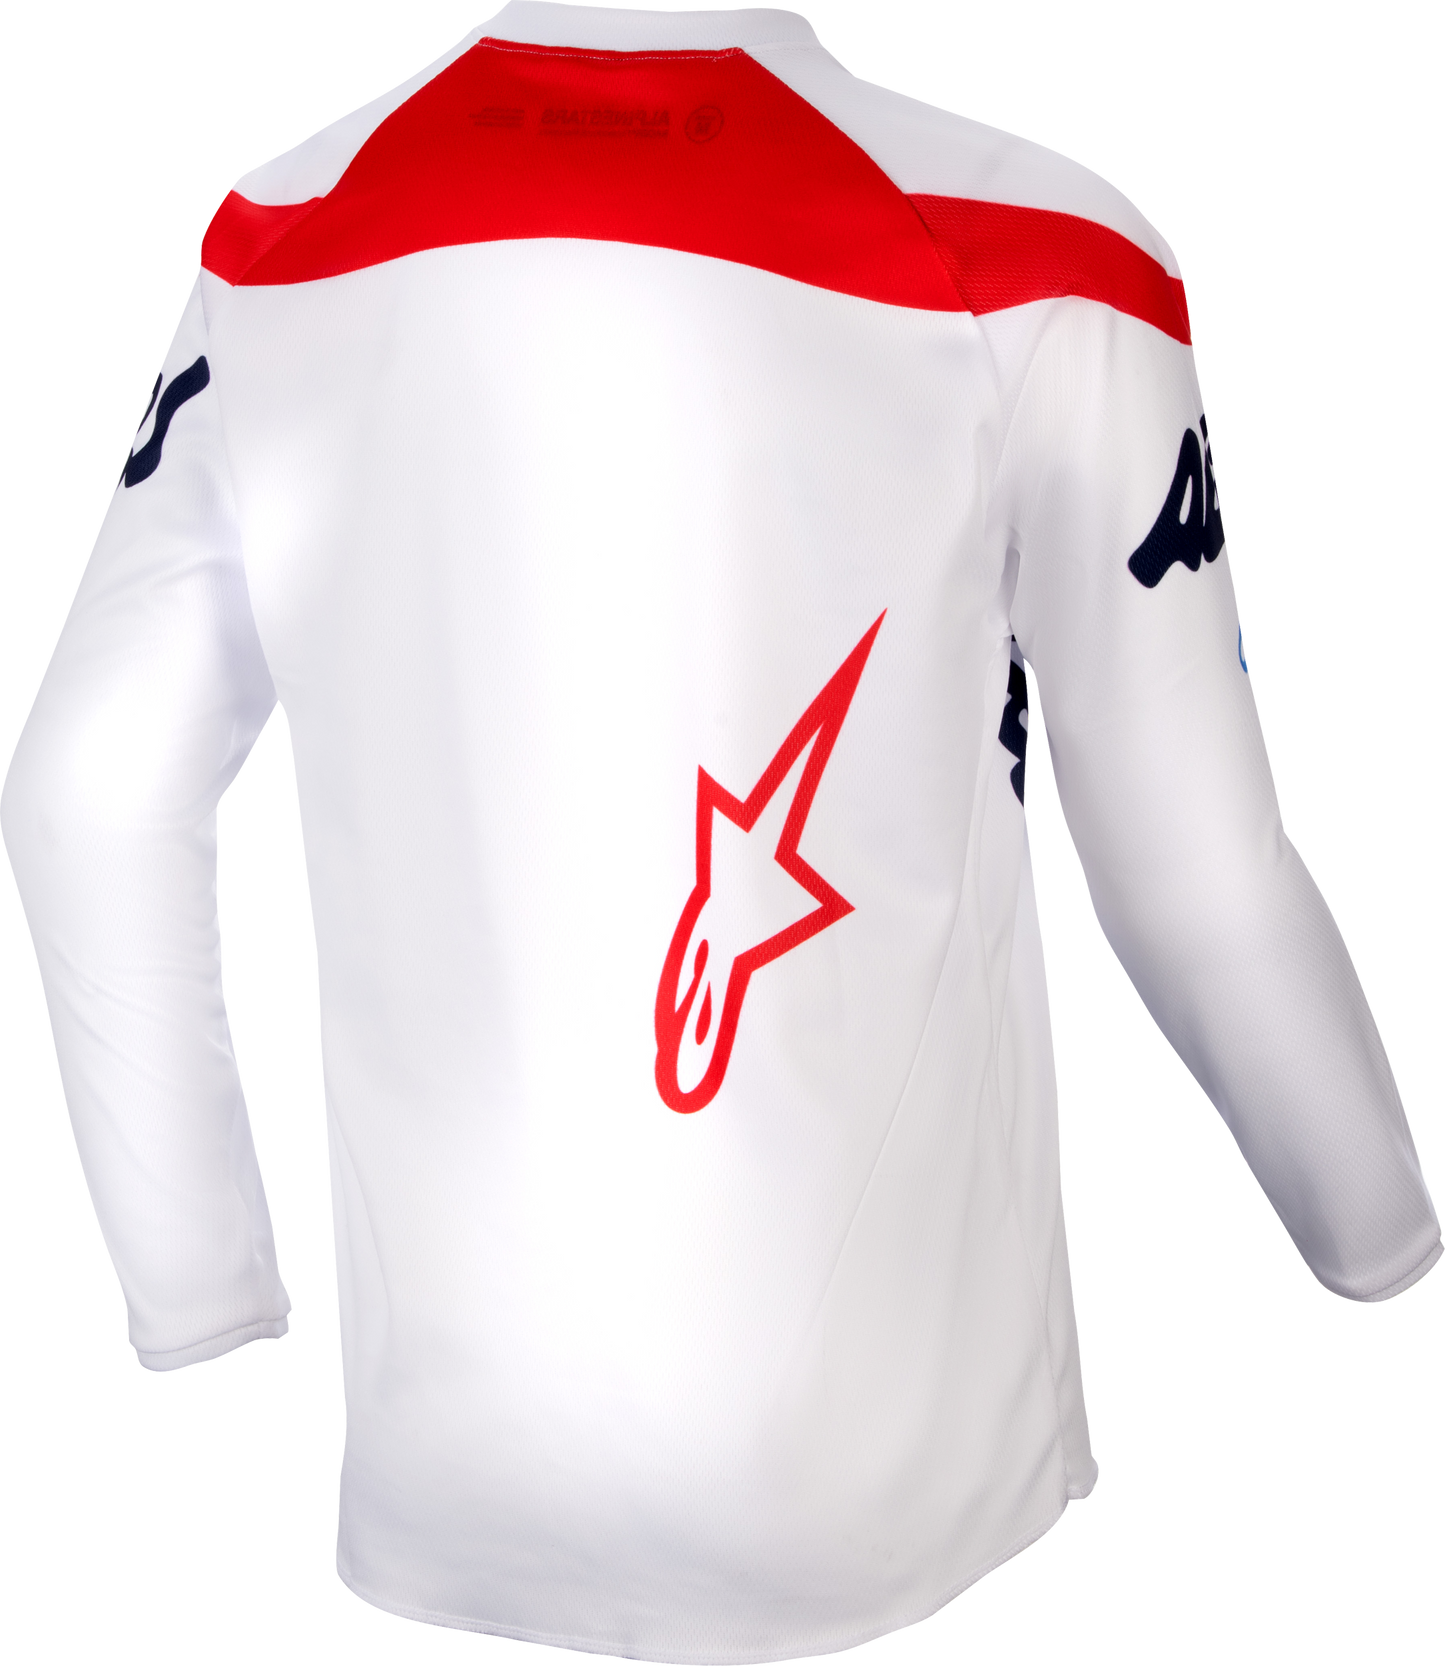 YOUTH RACER HANA JERSEY WHITE/MULTICOLOR